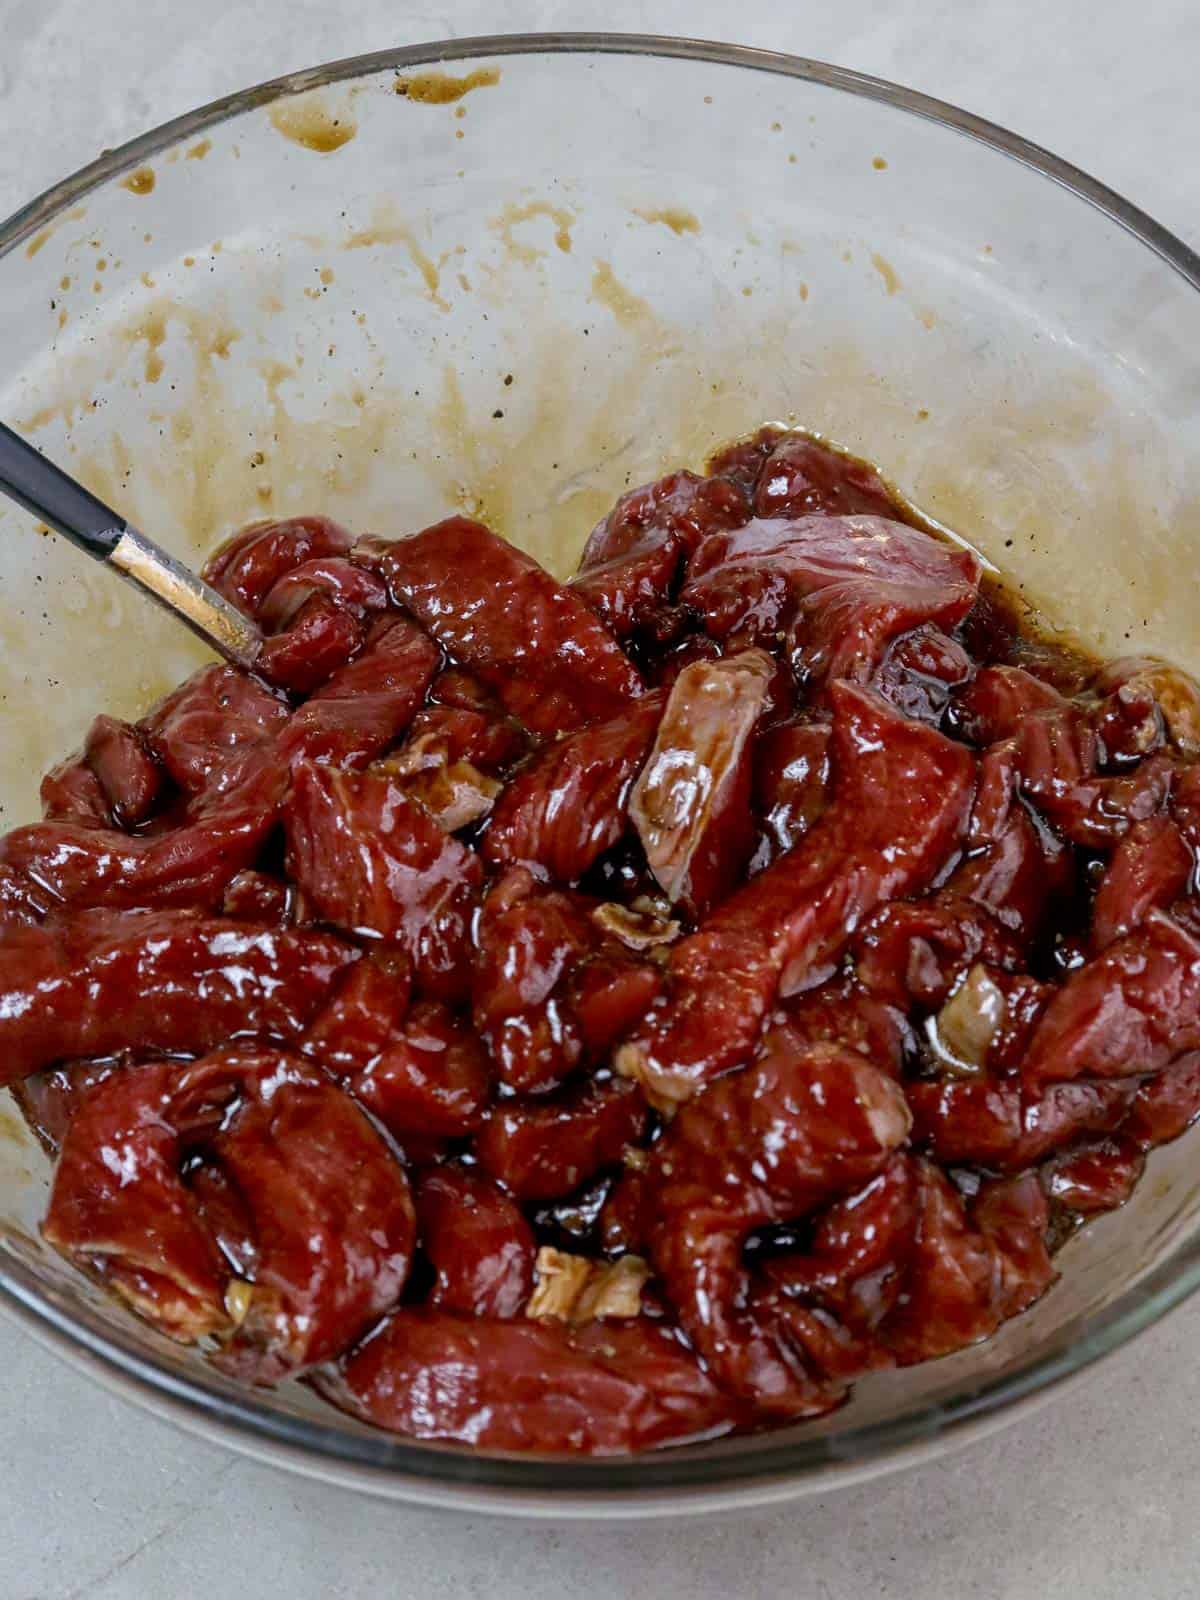 marinating beef strips in soy sauce, oyster sauce, and cornstarch in a glass bowl.